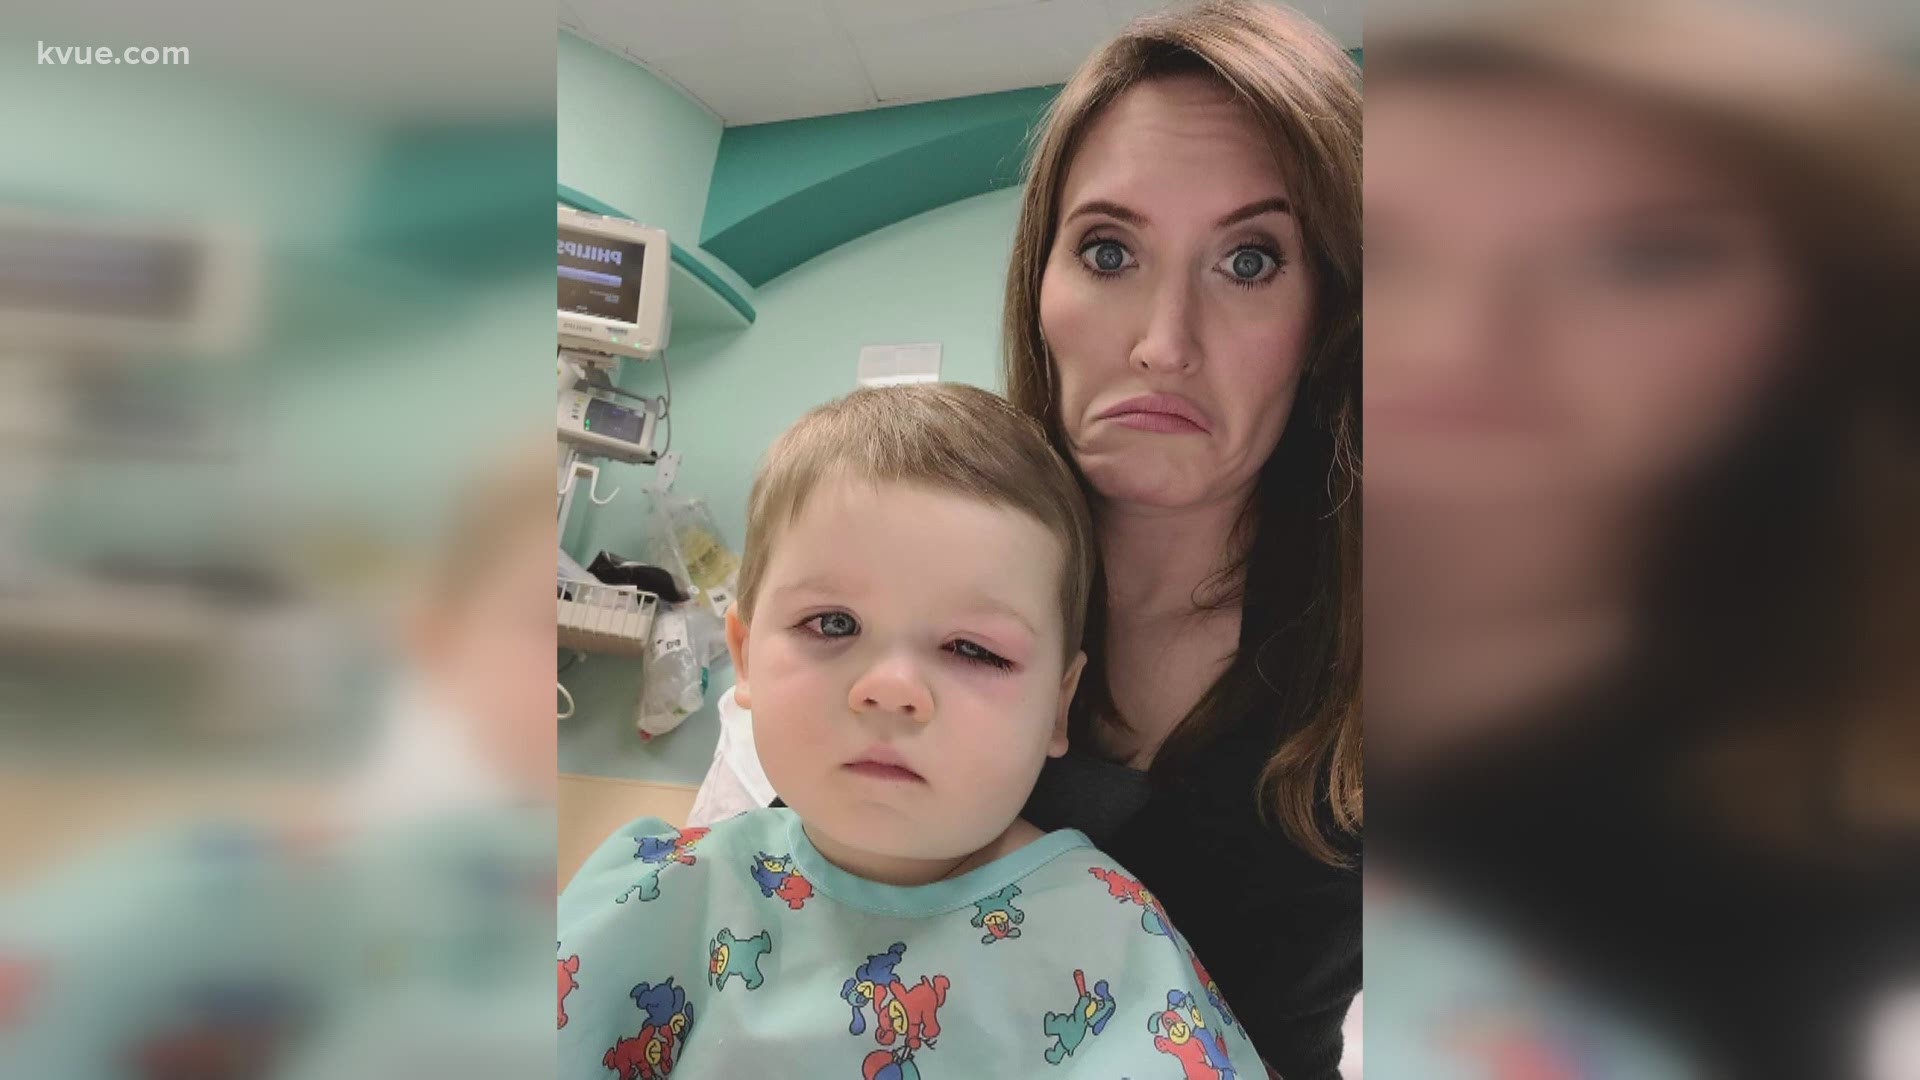 One mother said her two-year-old son nearly lost his vision after contracting an infection from a tub toy. He was taken to urgent care, then the ER.